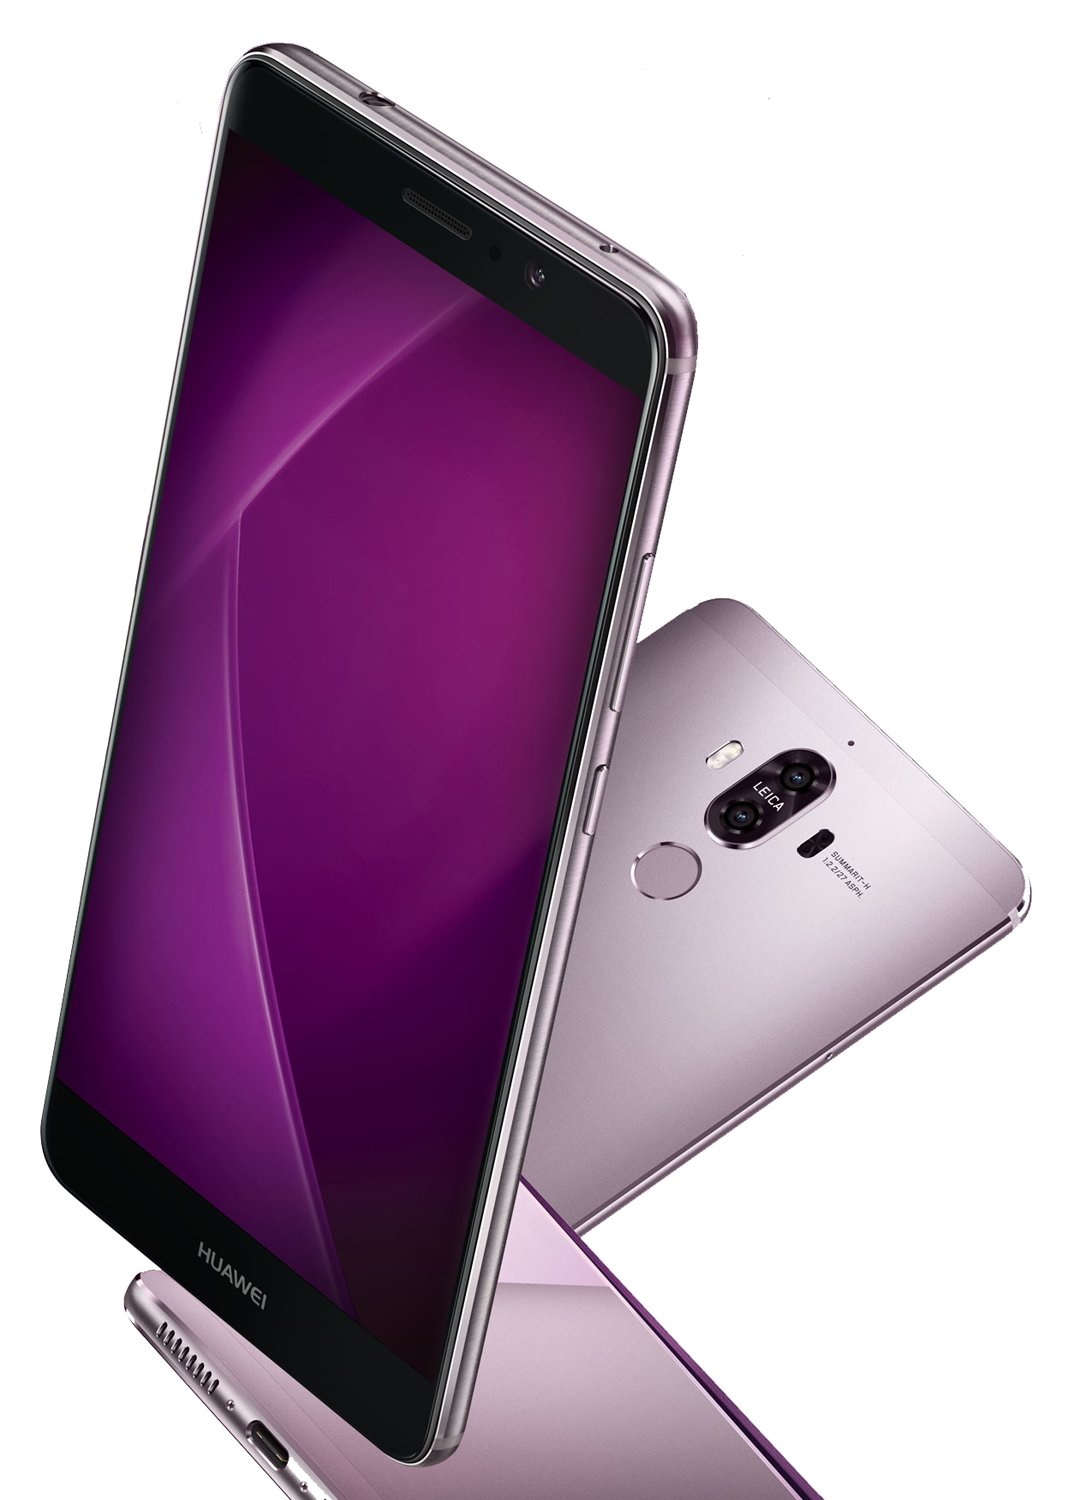 huawei-mate-9-official-render